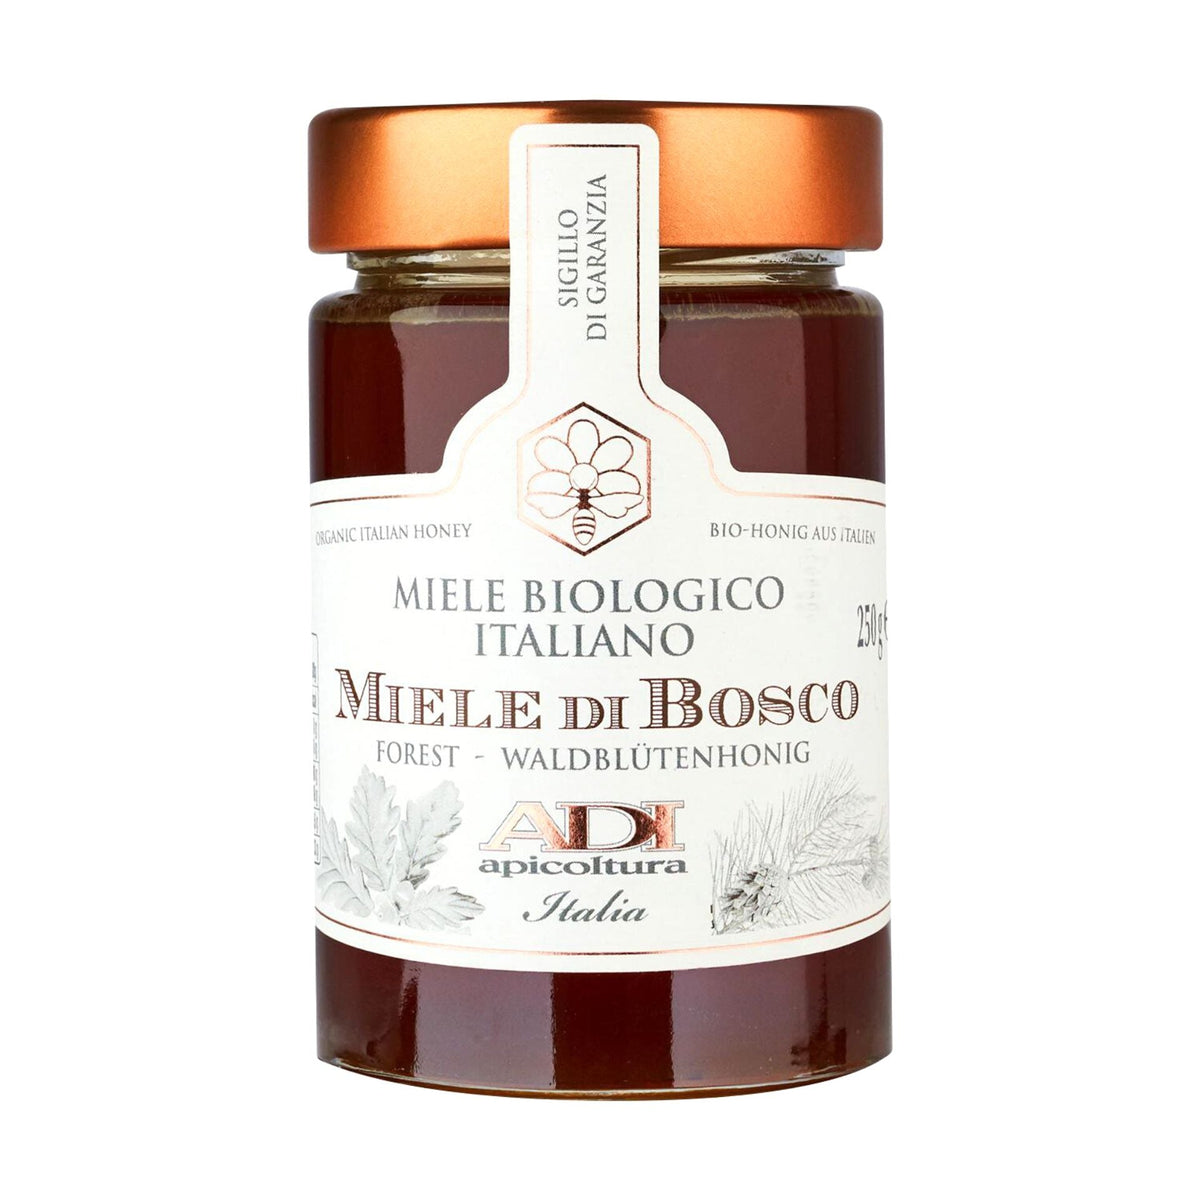 Adi Apicoltori Organic Wildforest Honeydew Honey 250g  | Imported and distributed in the UK by Just Gourmet Foods